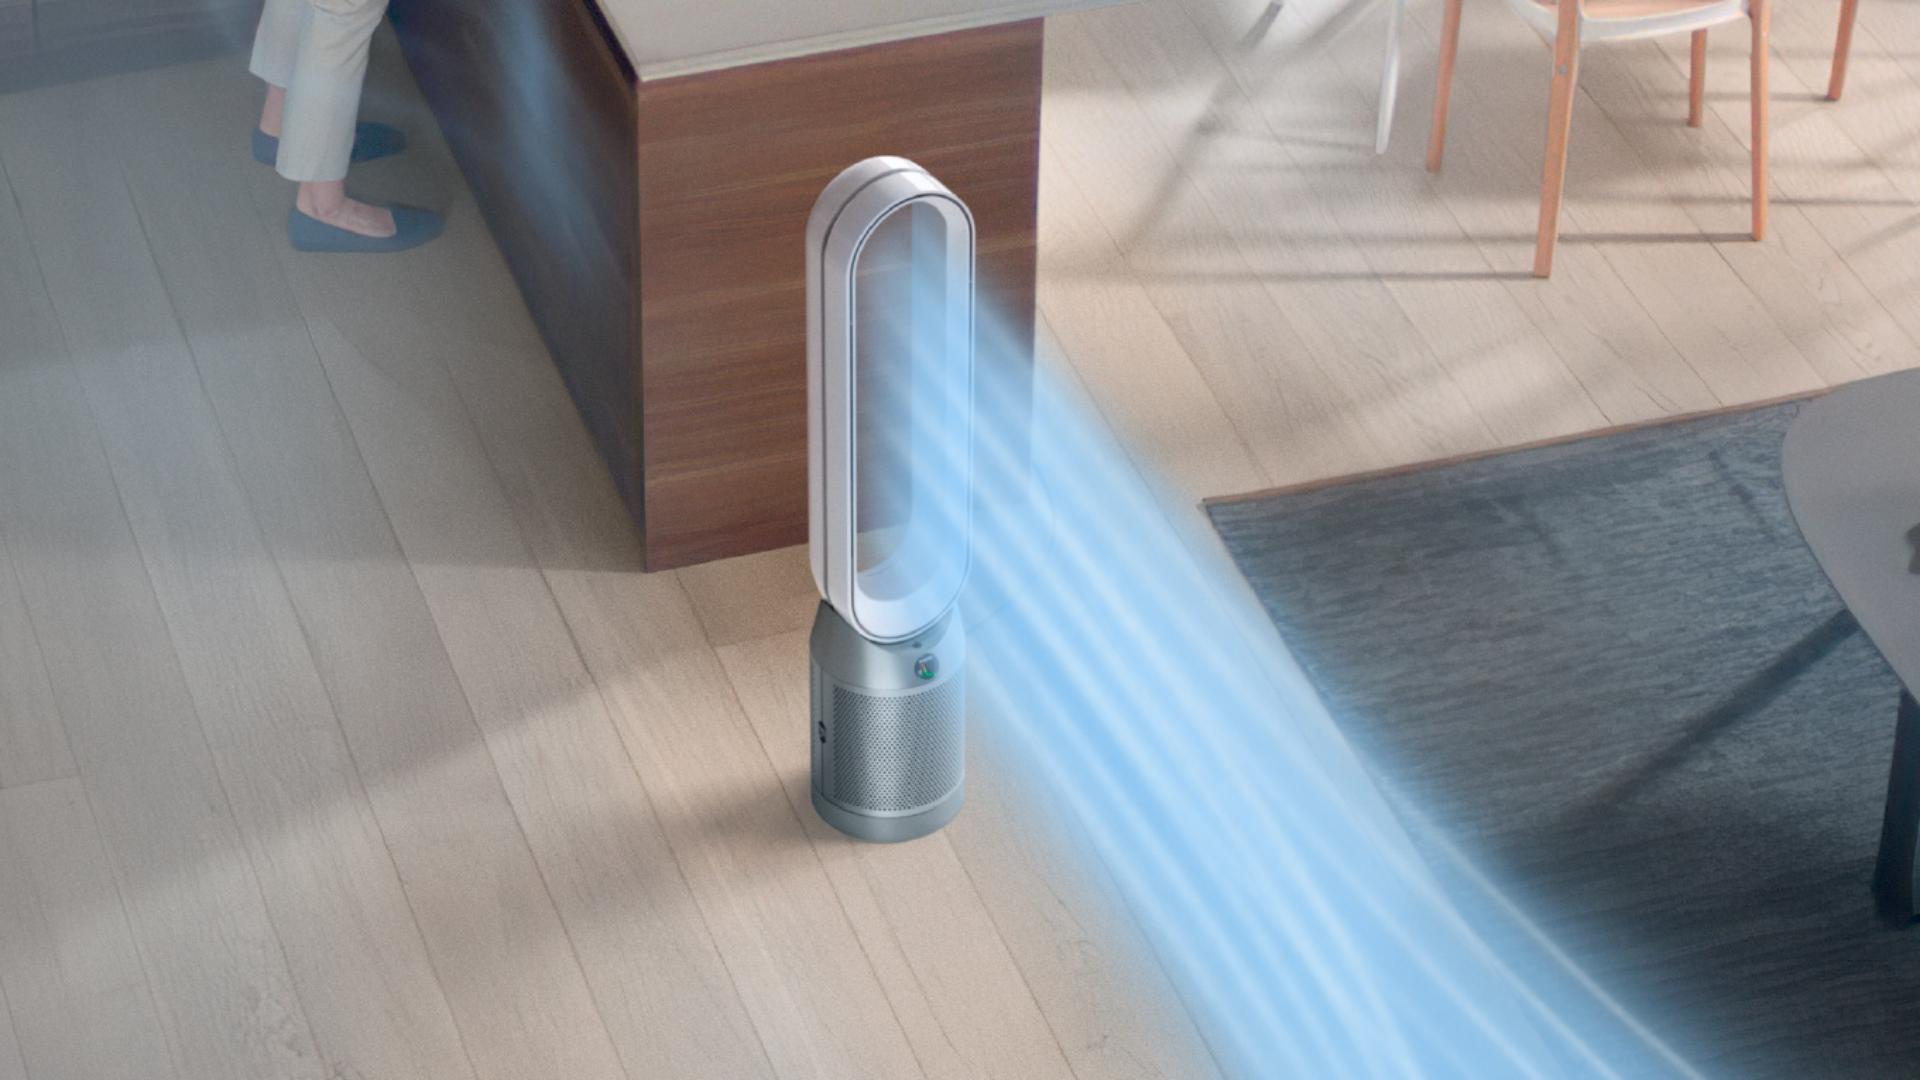 A Dyson purifier with the airflow highlighted in blue.